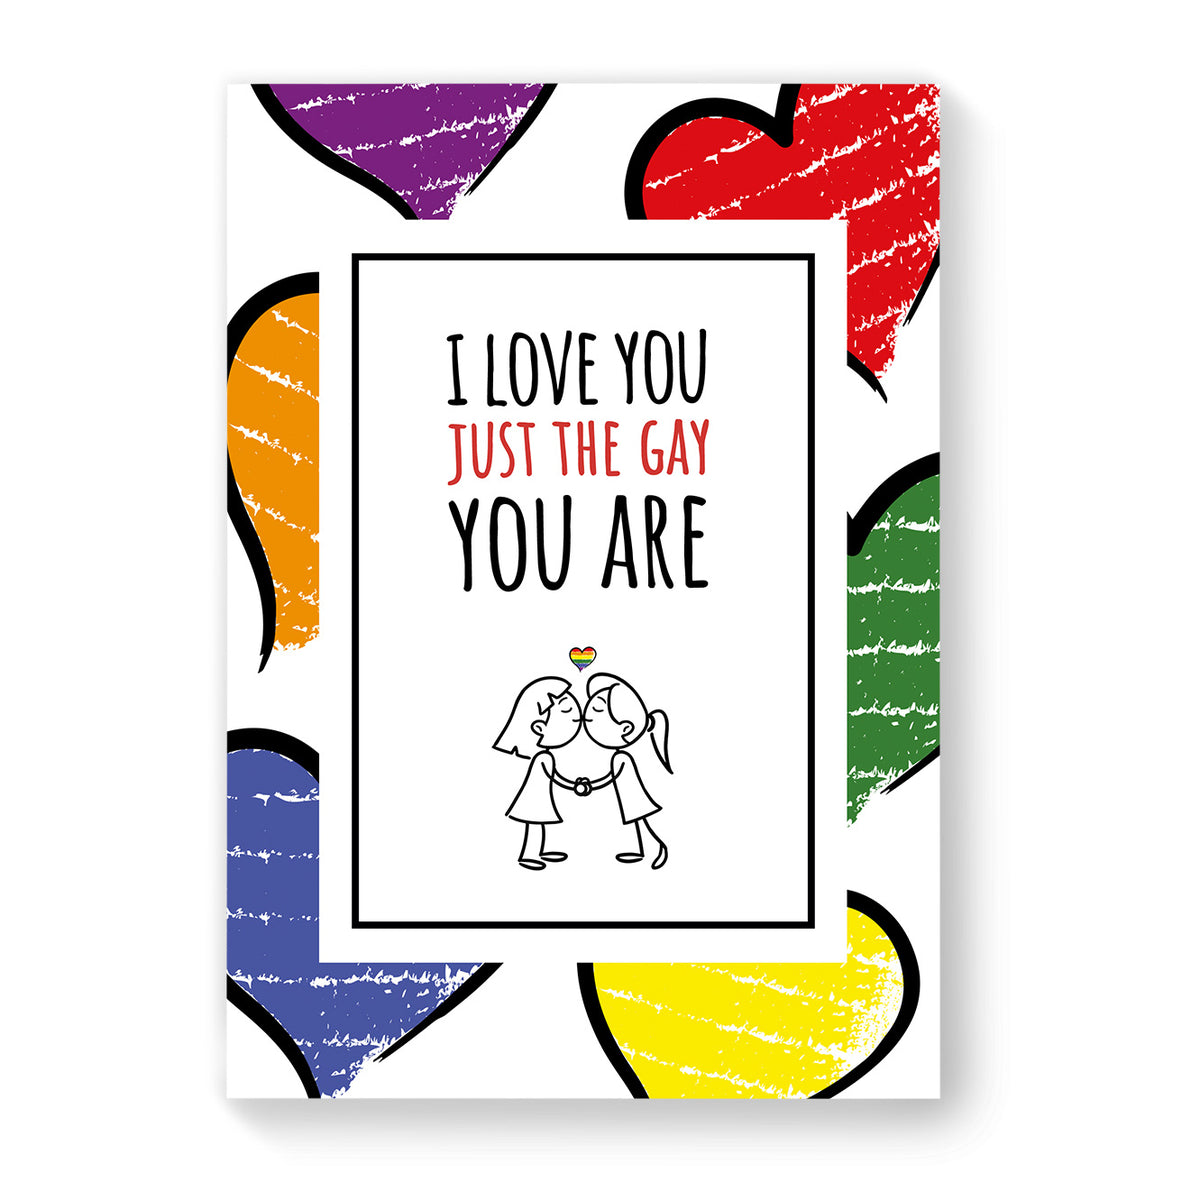 I love you just the gay you are - Lesbian Gay Couple Card - Large Heart | Gift